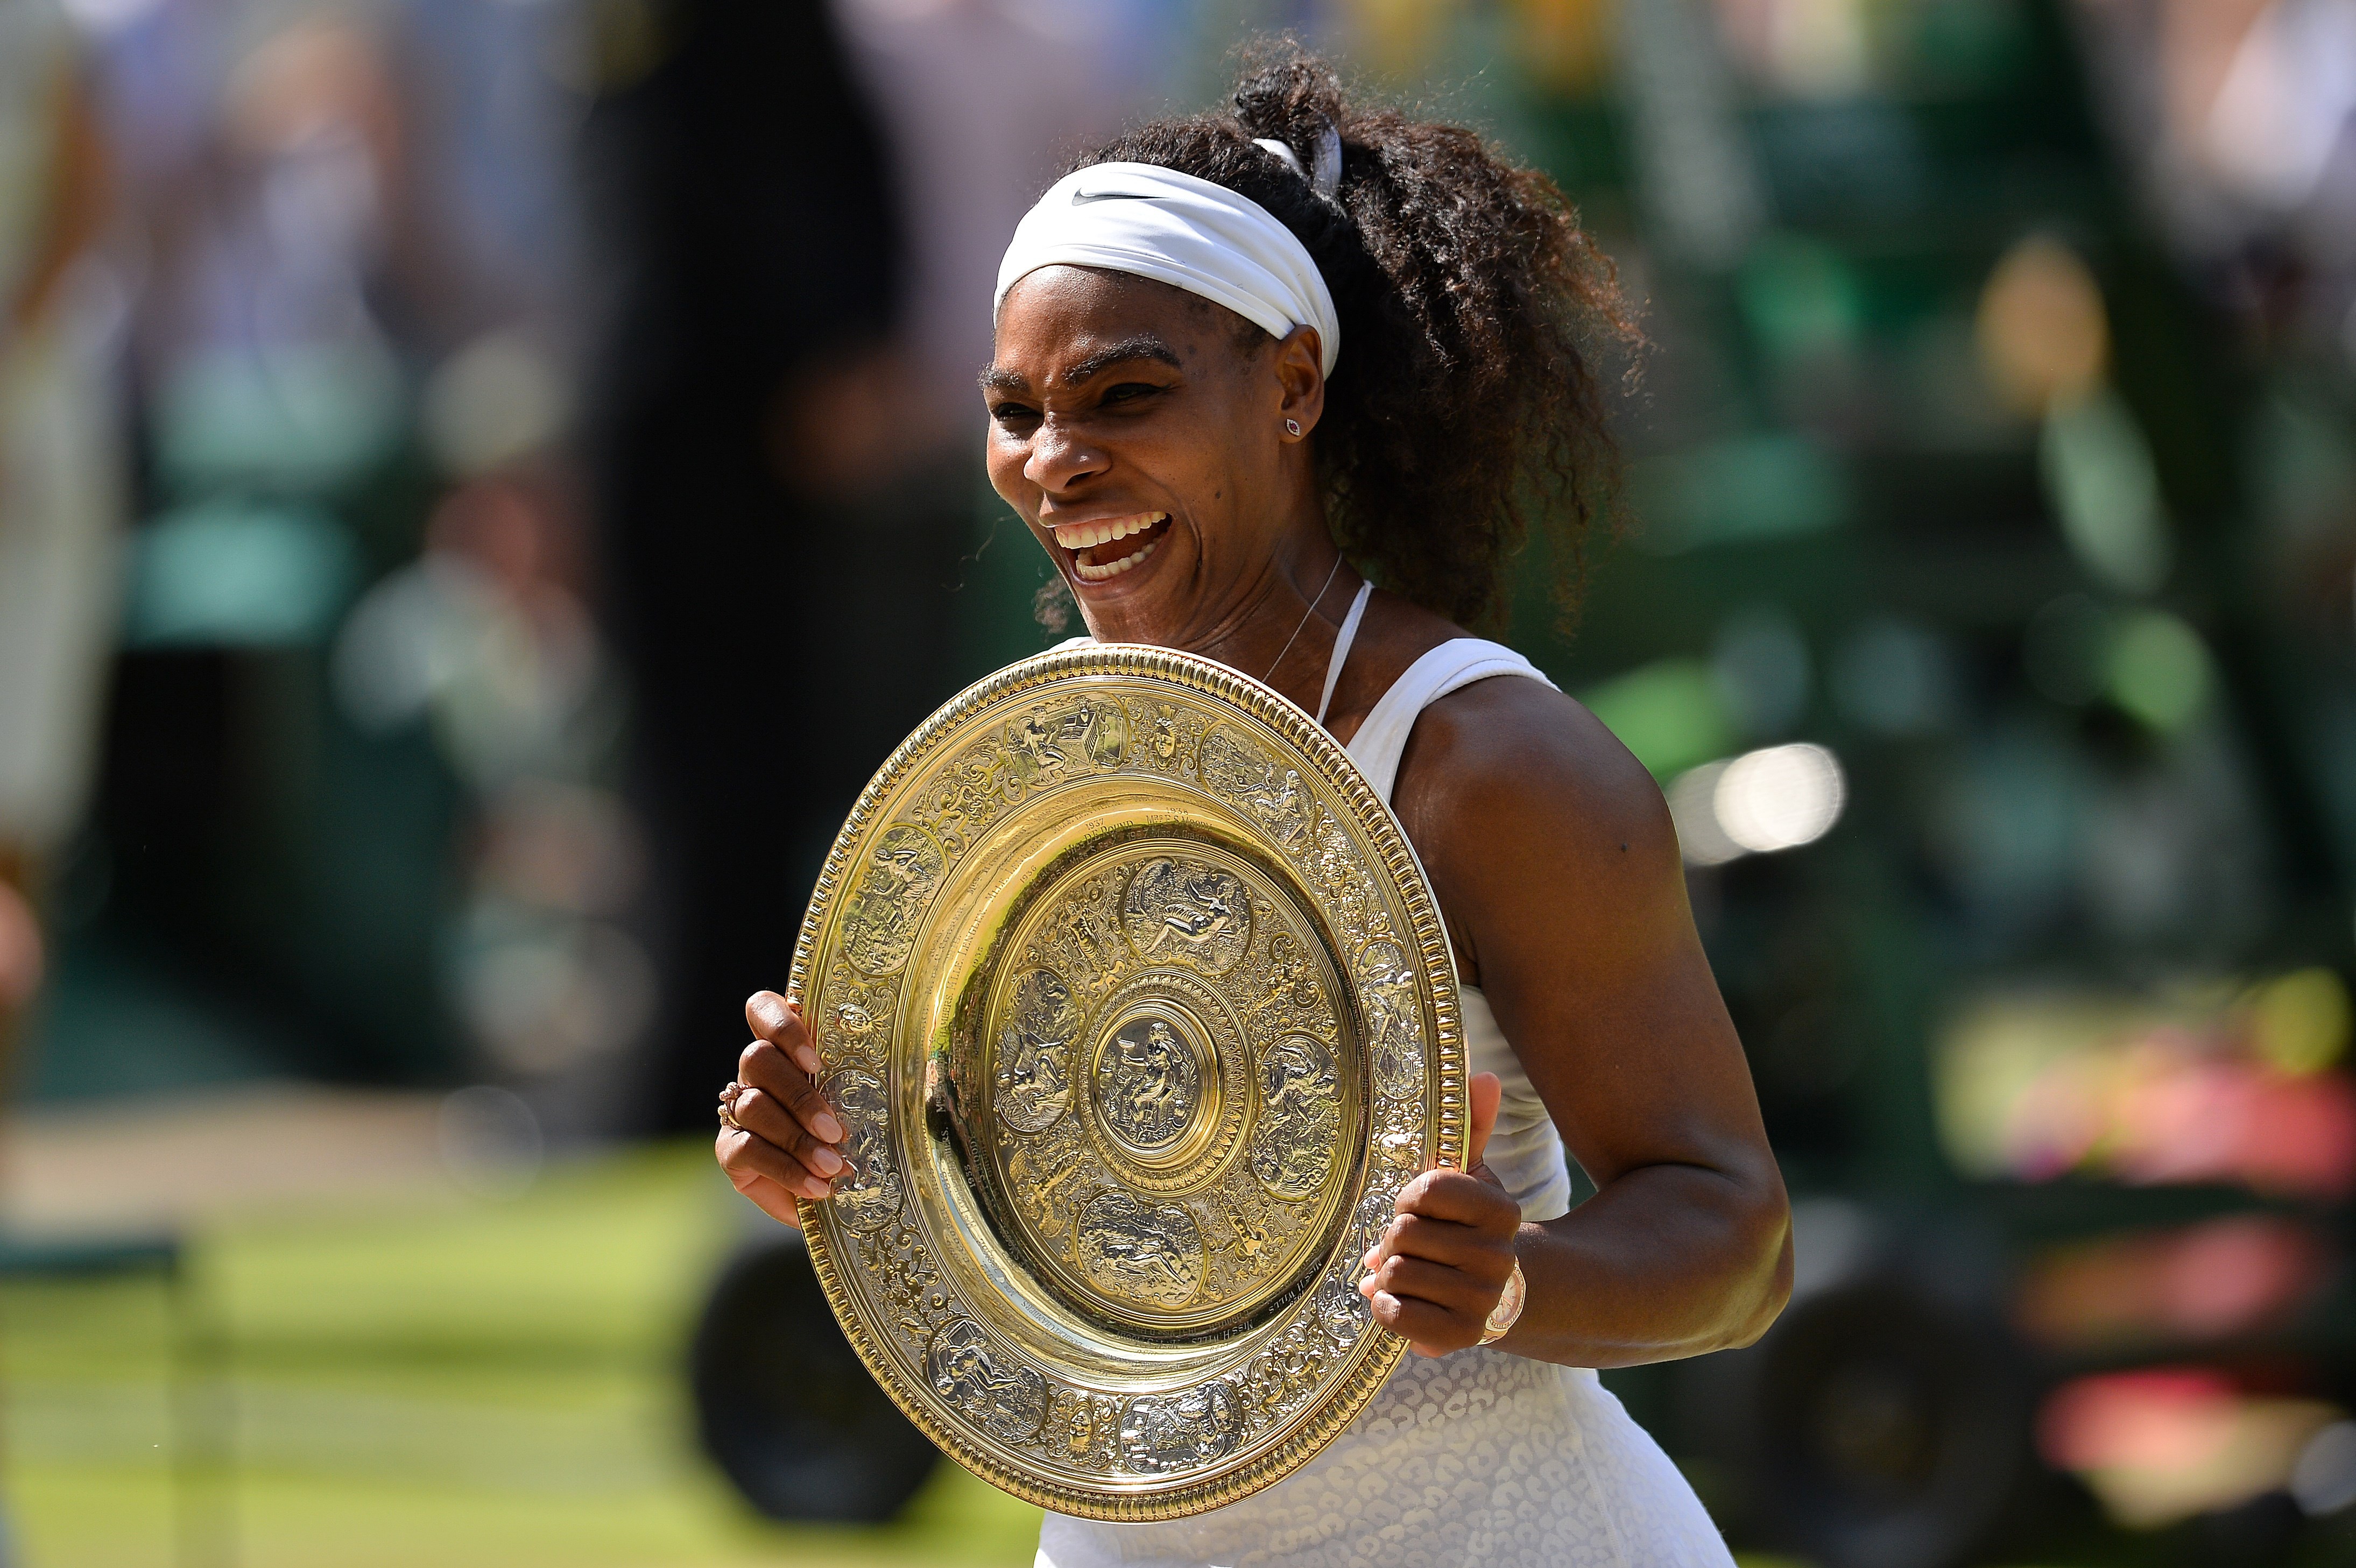 Serena Williams celebrates with the winner's trophy after her women's singles final victory over Spain's Garbine Muguruza at the 2015 Wimbledon Championships in London, on July 11, 2015. (Glyn Kirk—AFP/Getty Images)